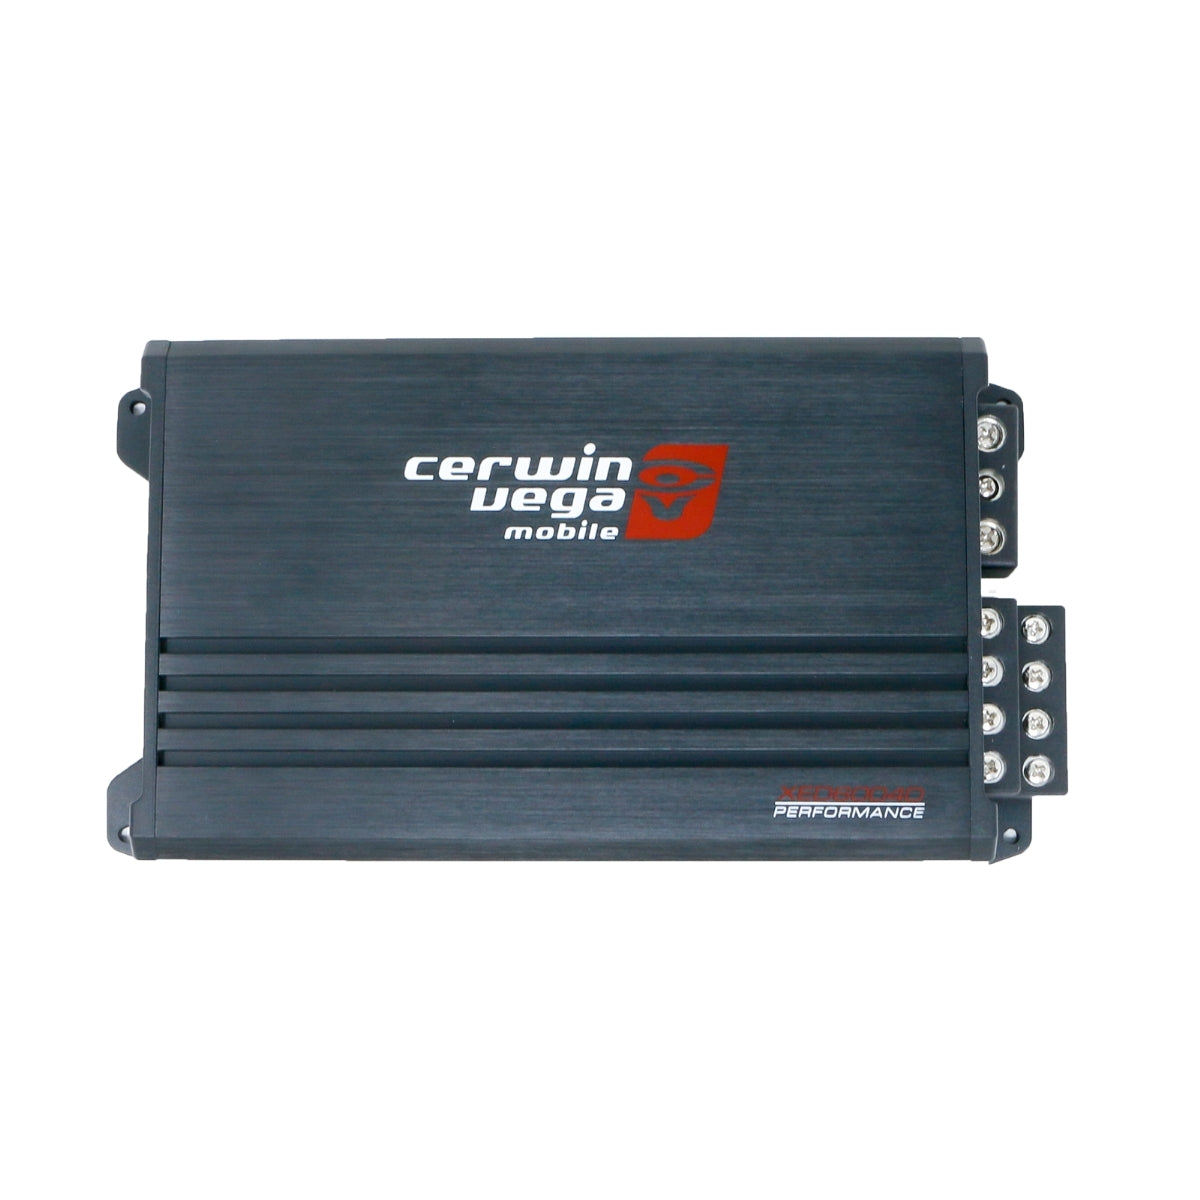 The image showcases a Cerwin Vega XED Series 480W RMS 4 Channel Amplifier. This Cerwin Vega amplifier features a sleek, black rectangular design with the brand's logo prominently displayed in white and red at the center. On the right side, various silver terminal connectors are visible, highlighting its advanced Class D technology.